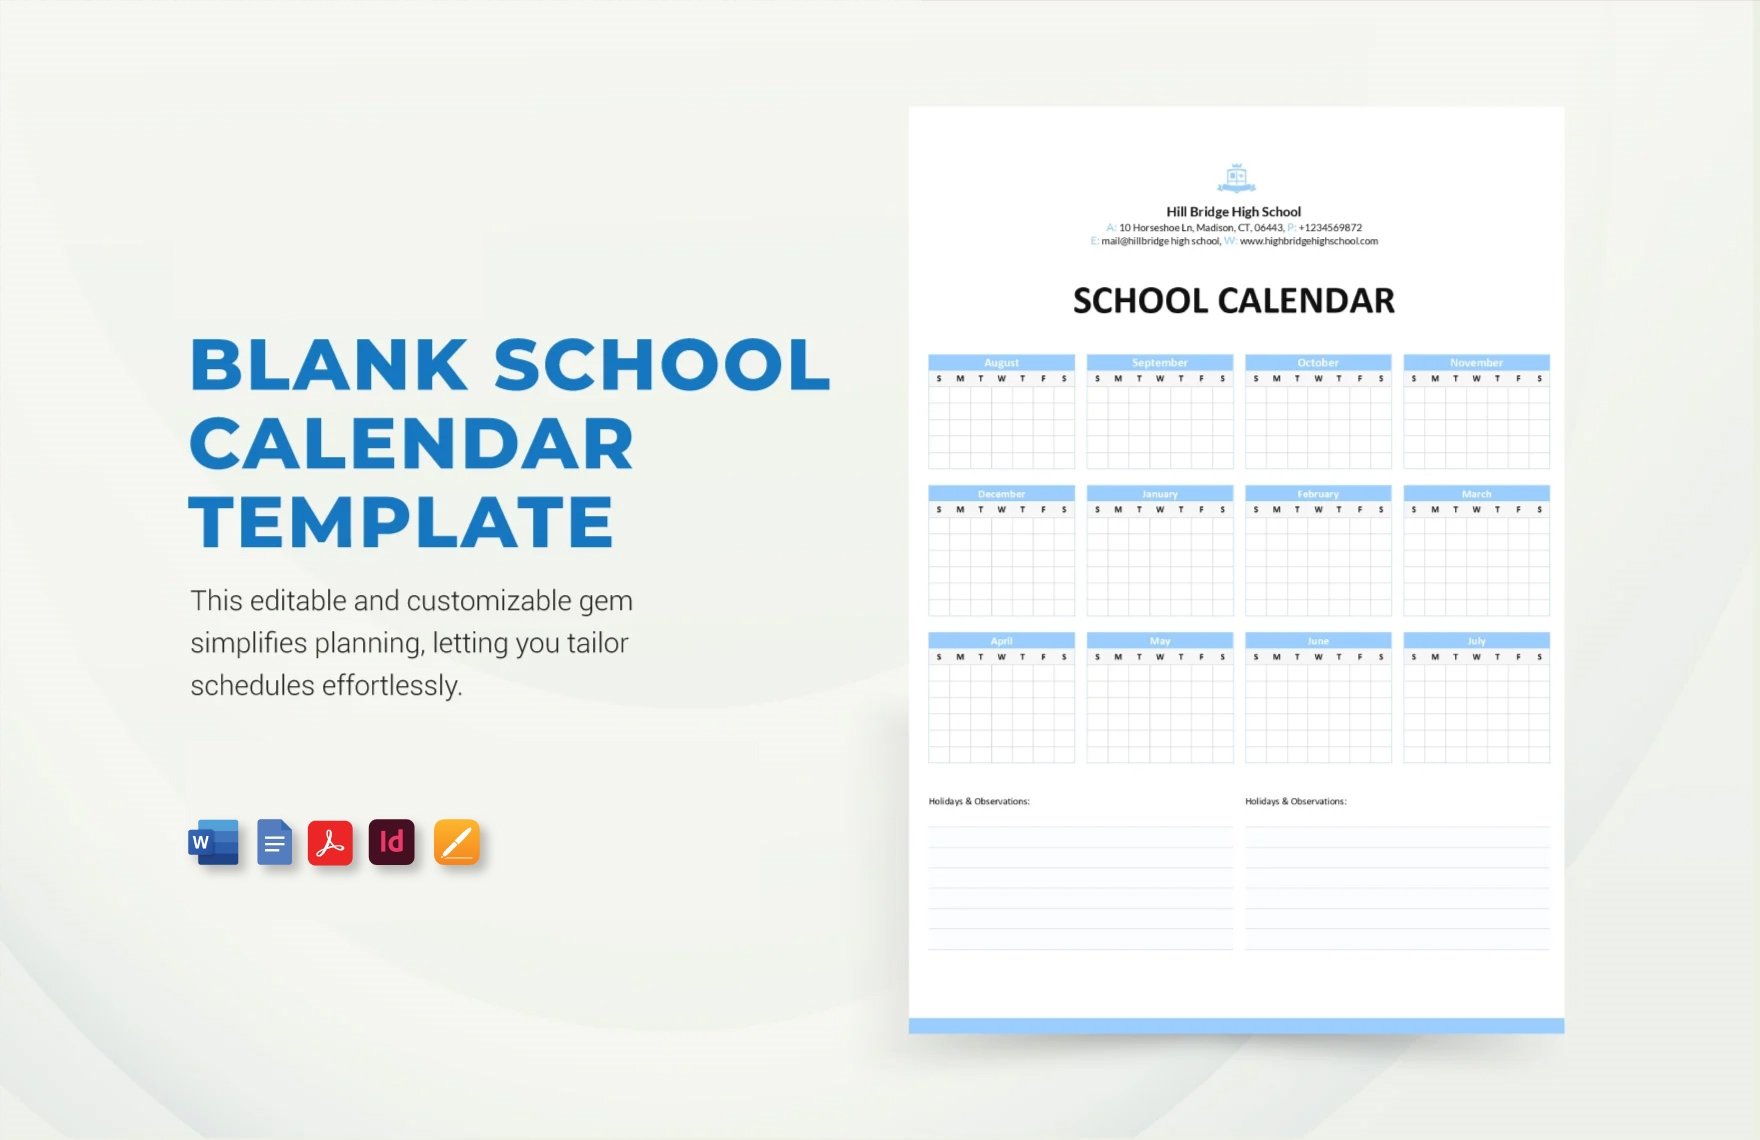 Free Blank School Calendar Template in Word, Google Docs, PDF, Apple Pages, InDesign